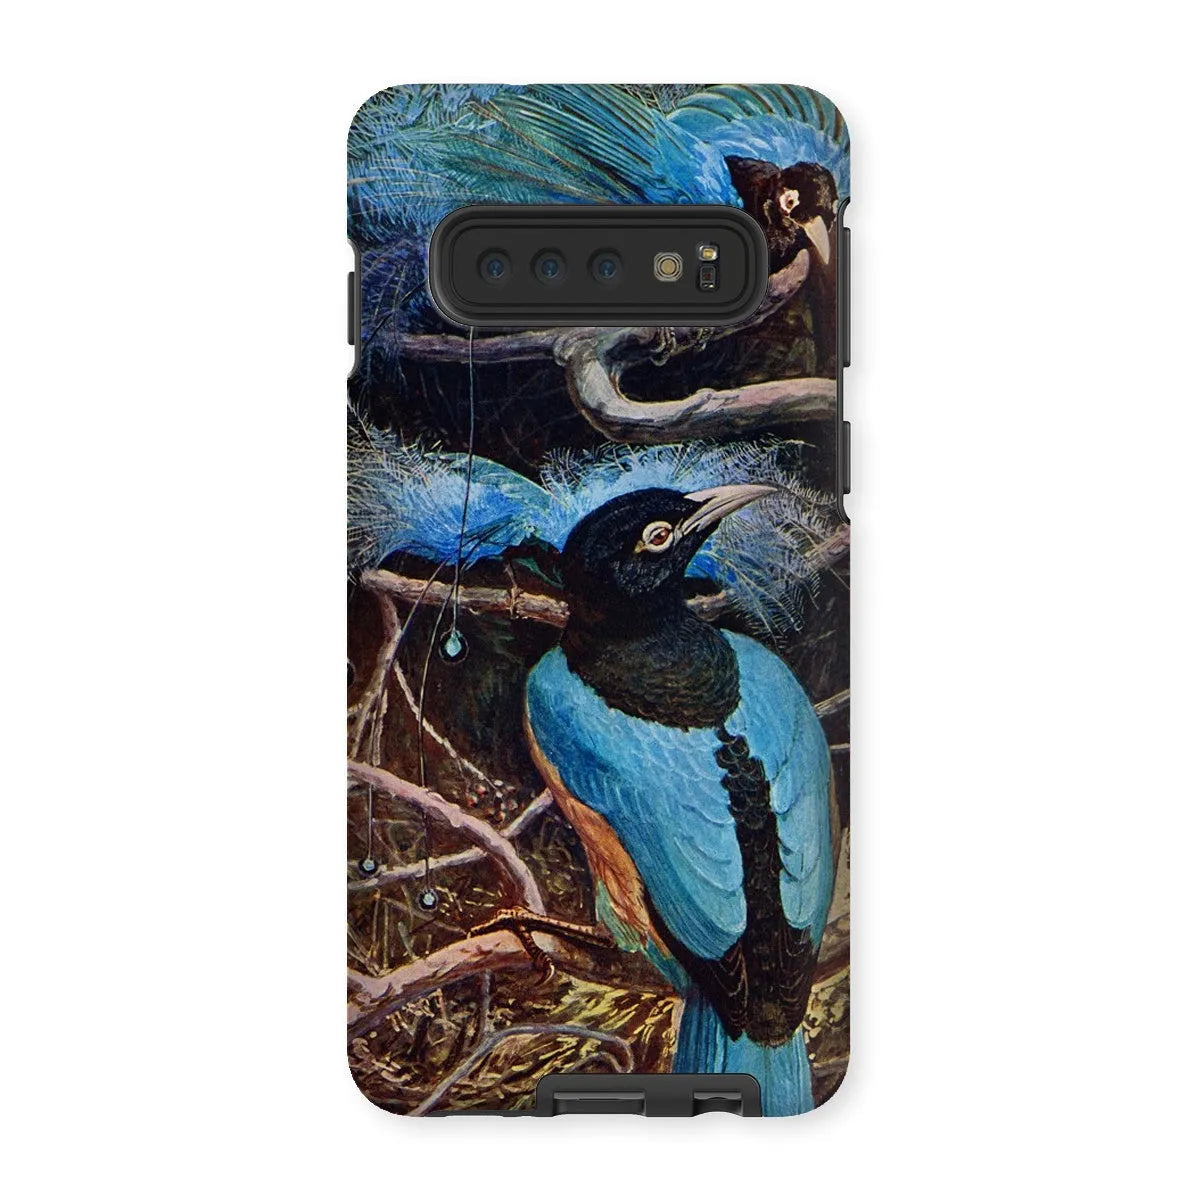 Blue Bird Of Paradise Aesthetic Phone Case - Henry Johnston - Samsung Galaxy S10 / Matte - Mobile Phone Cases